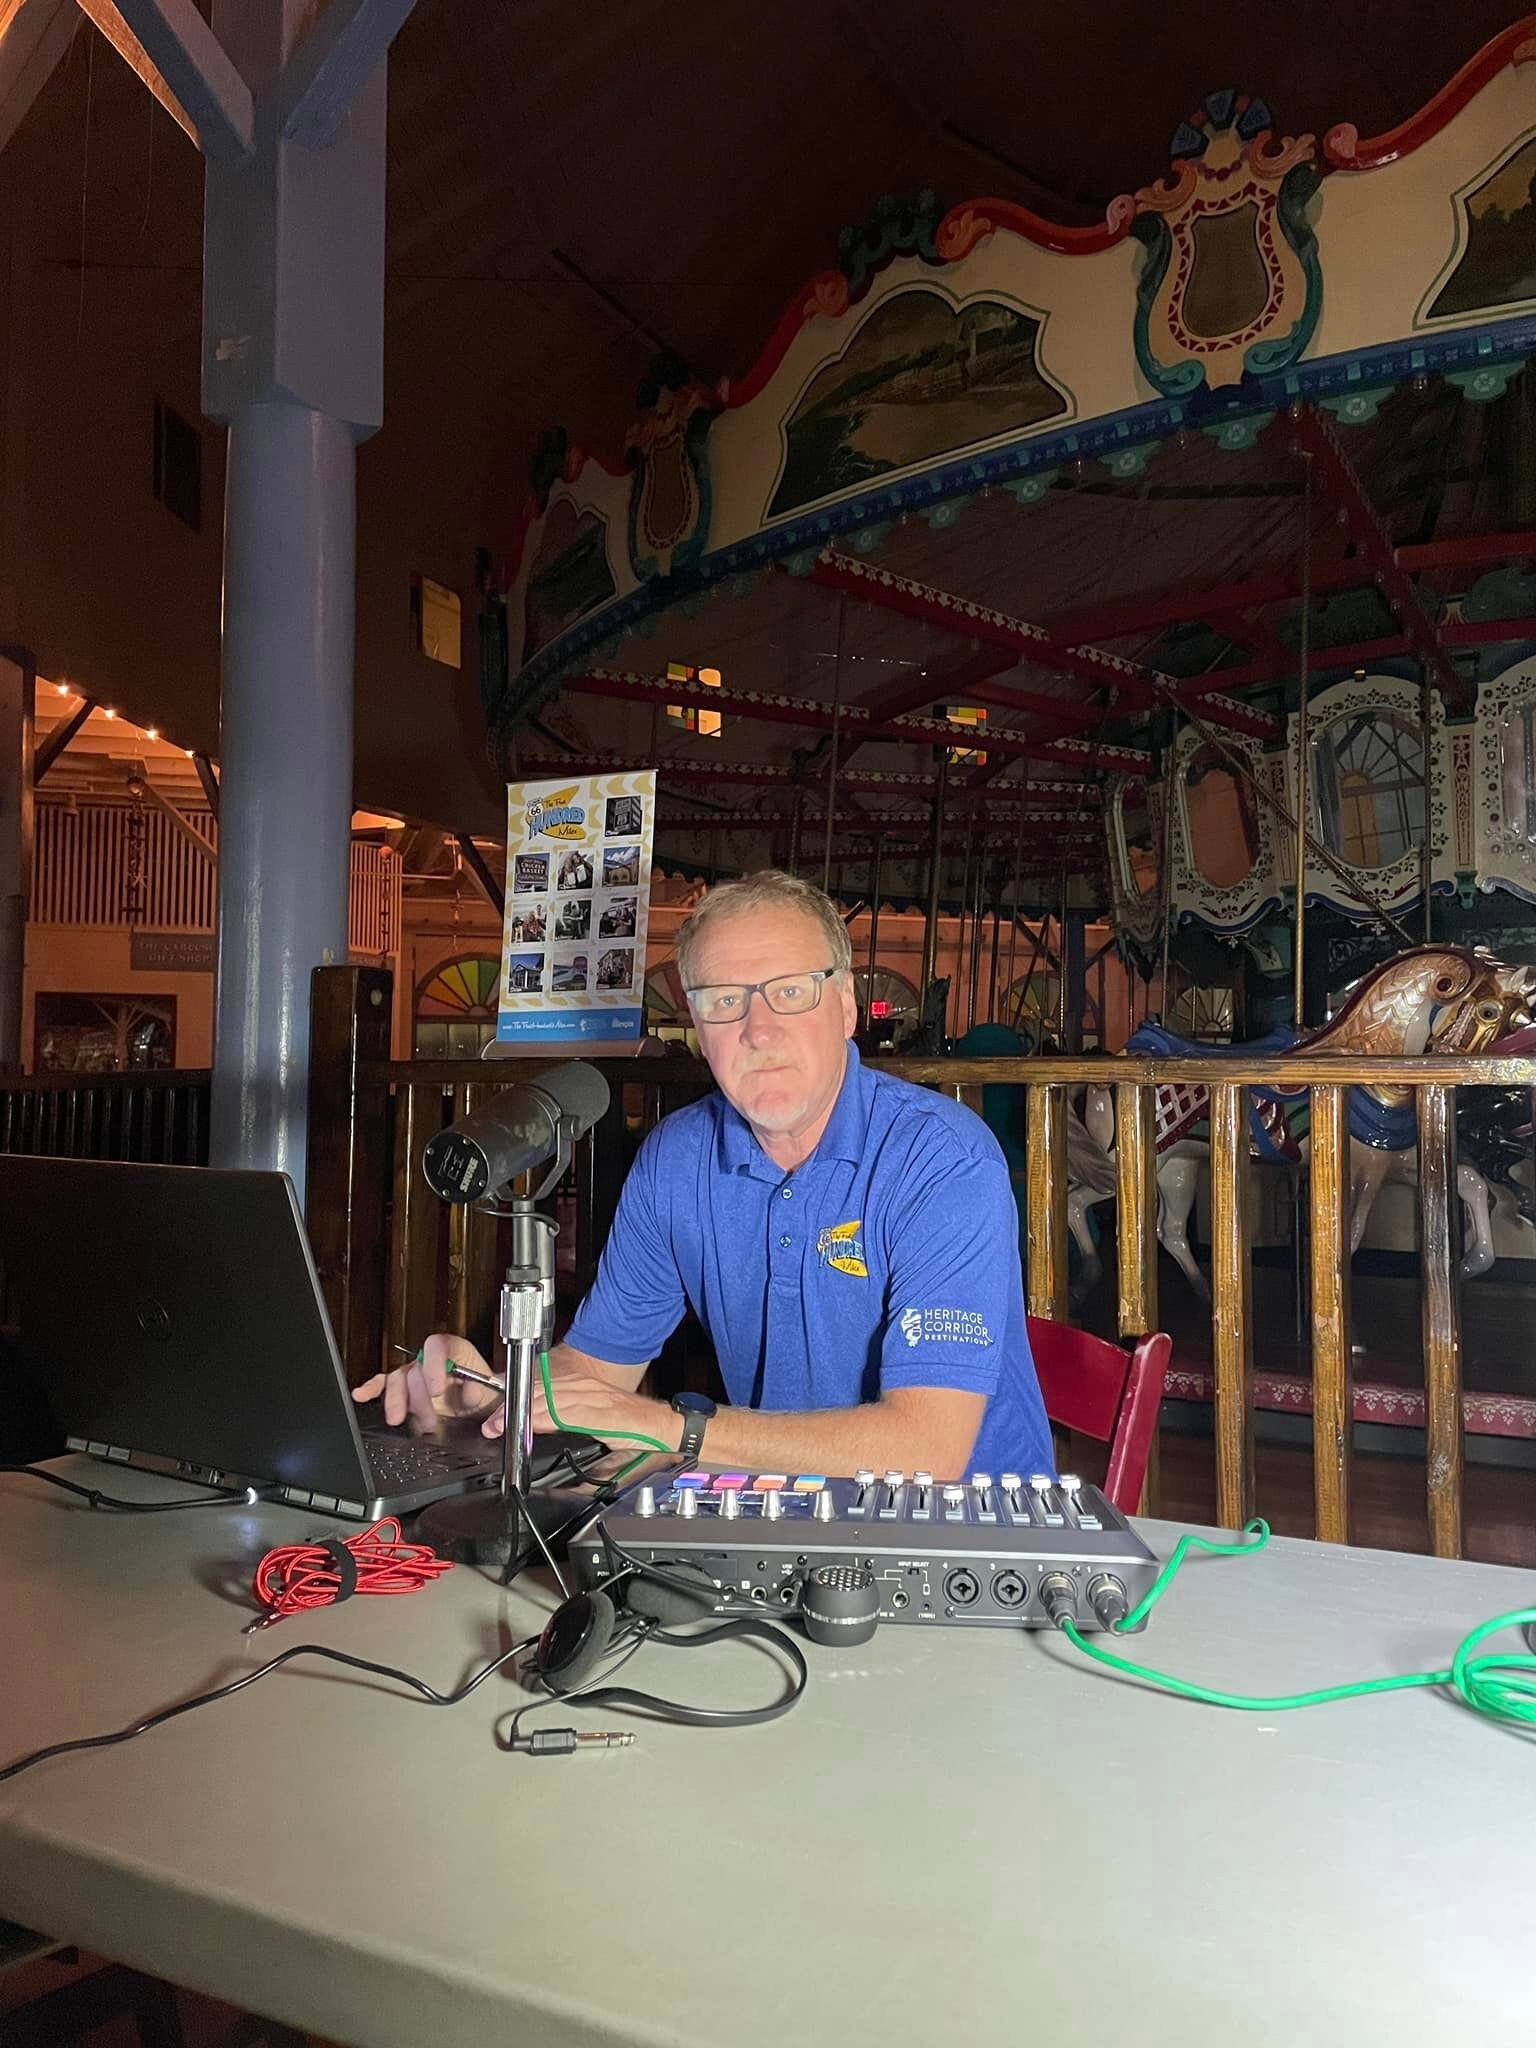 Slocum broadcast live from just outside of the Santa Monica Pier's iconic carousel. 